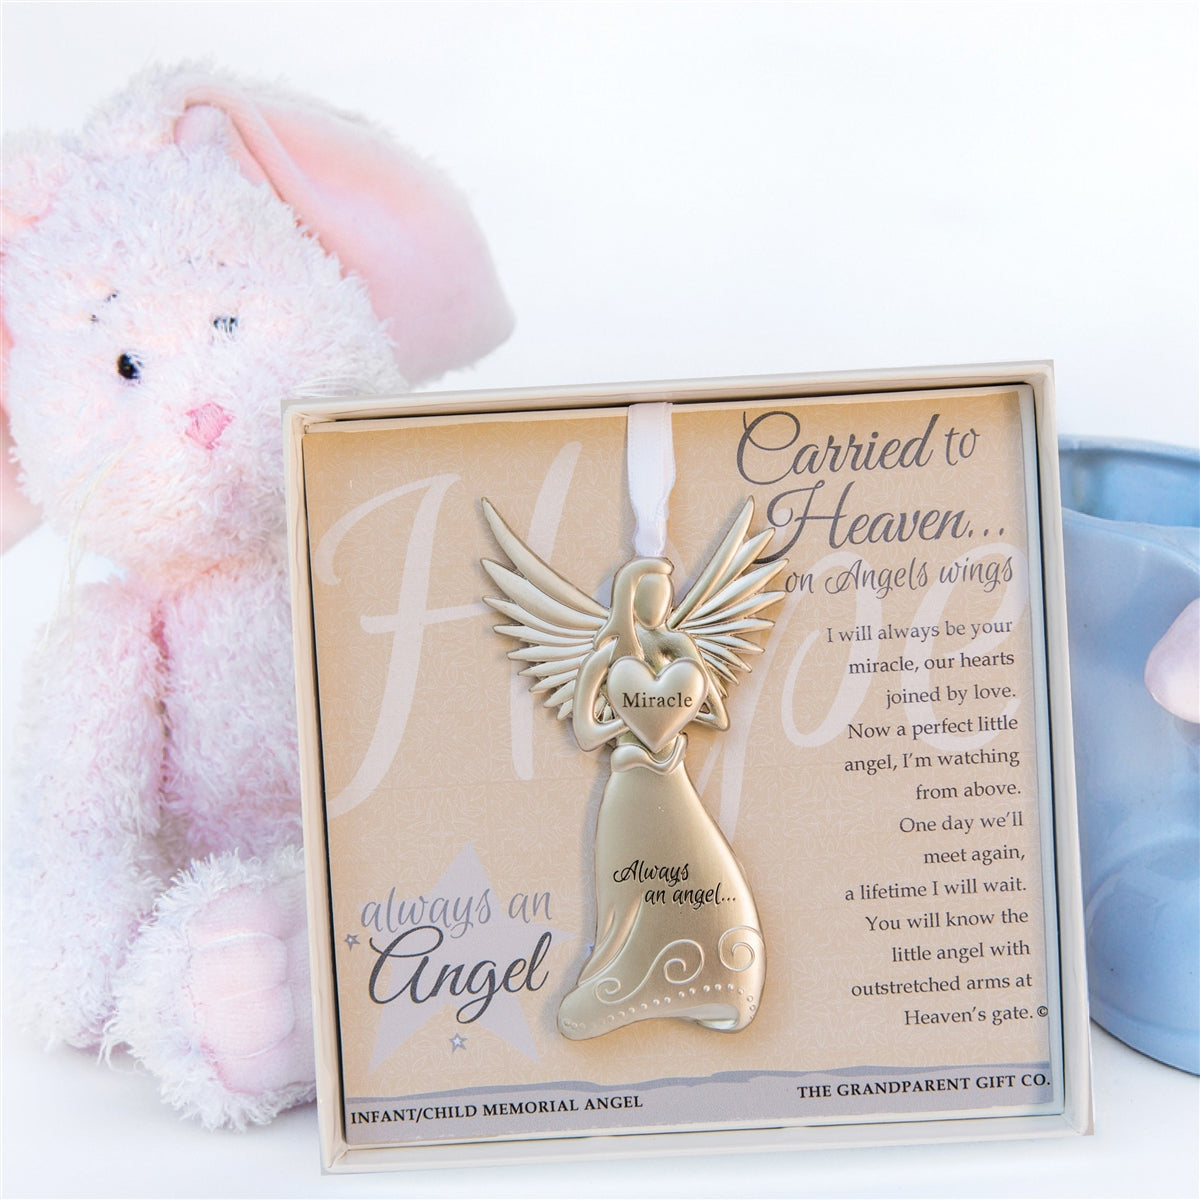 Carried to Heaven infant or child loss sympathy gift.